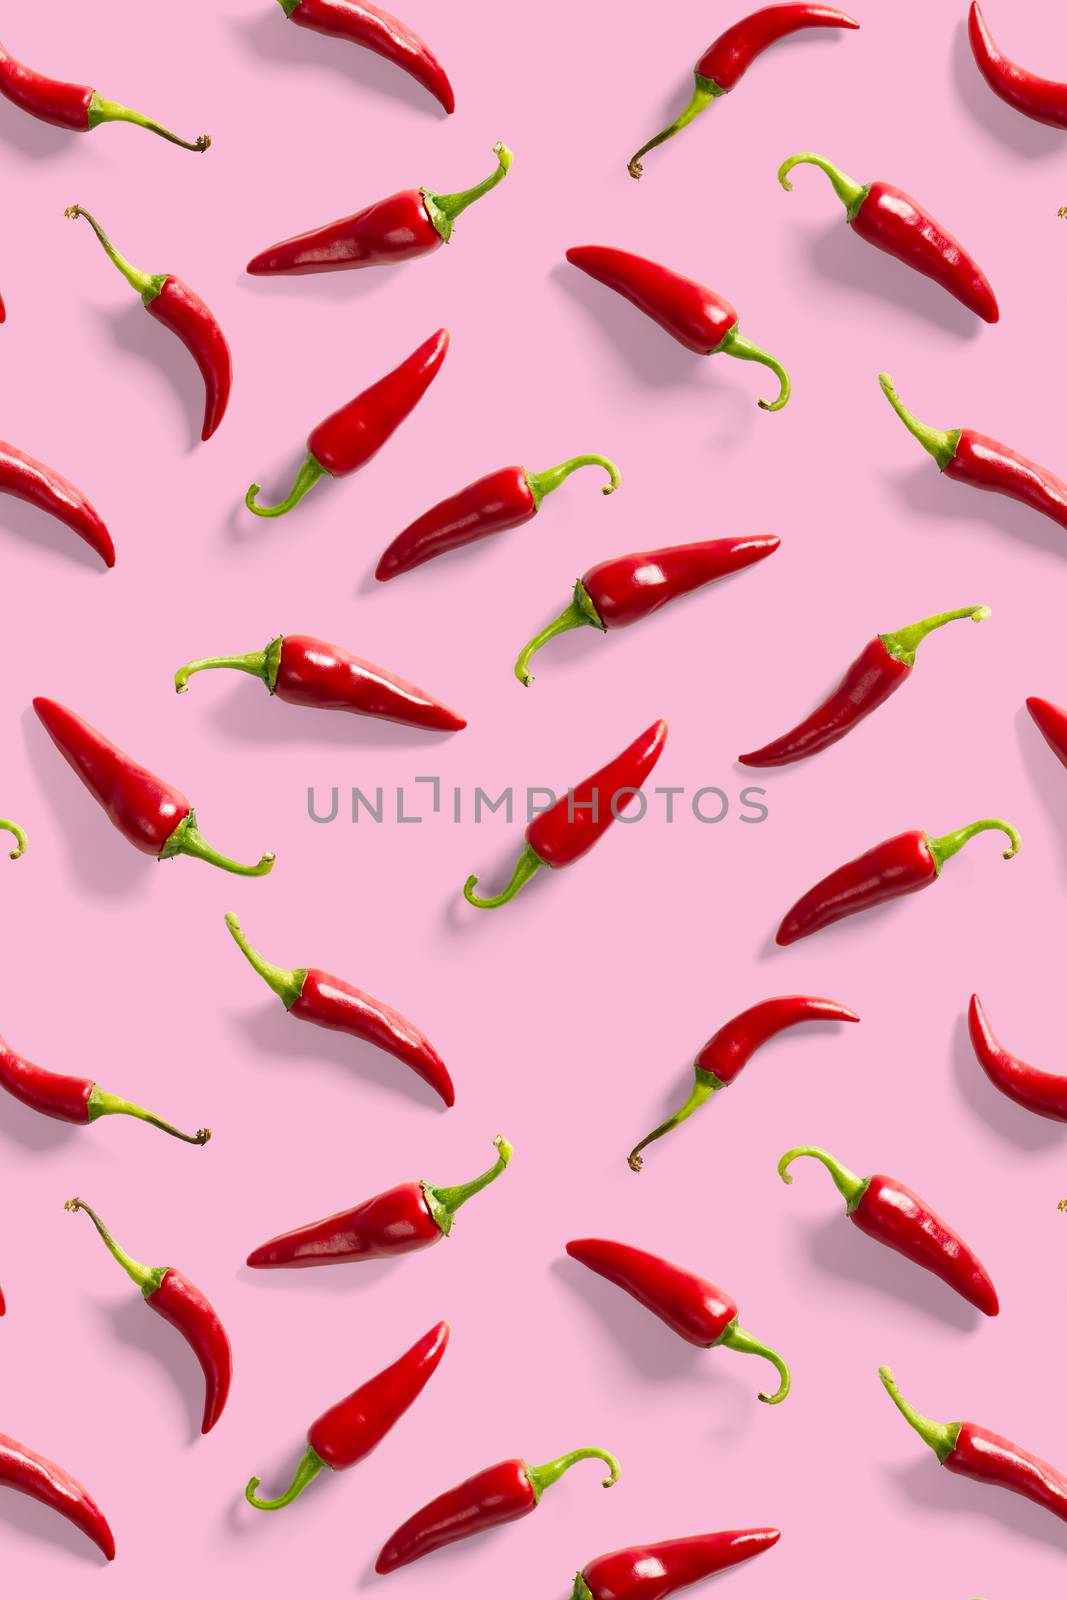 Creative background made of red chili or chilli on pink backdrop. Minimal food backgroud. Red hot chilli peppers background. by PhotoTime